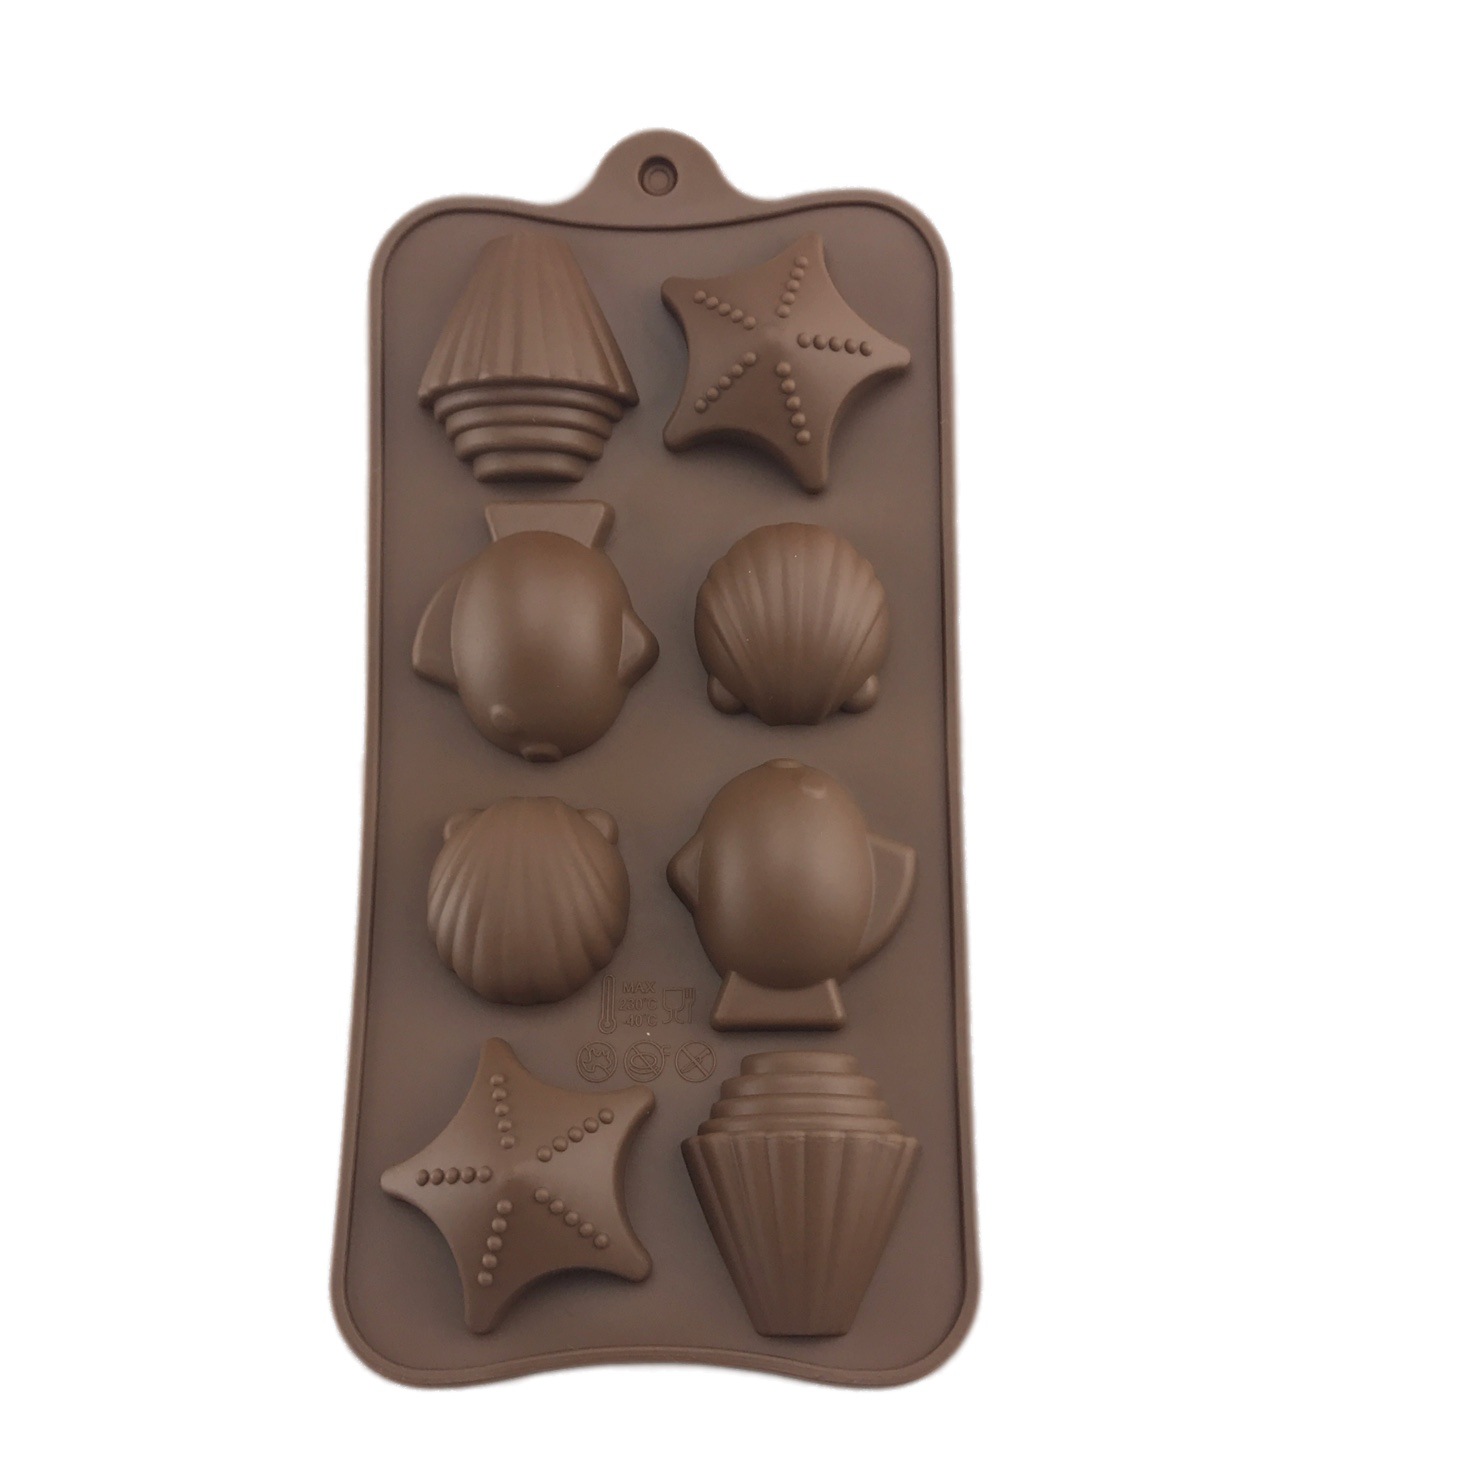 Diverse models Silicone Candy Chocolate Molds Flexible Baking Mold for Jello Shaping Hard or Gummy Candies